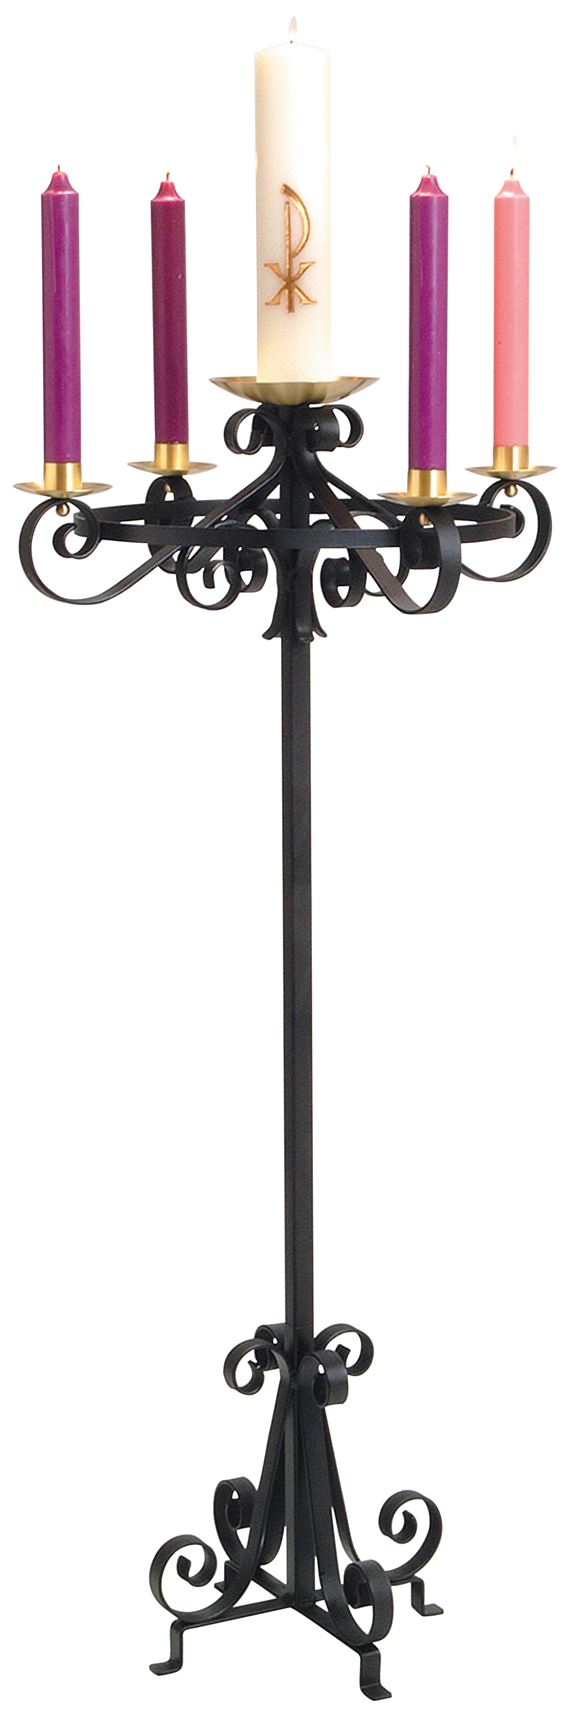 Standing Advent Wreath - 48" with Black Powder Coat Finish